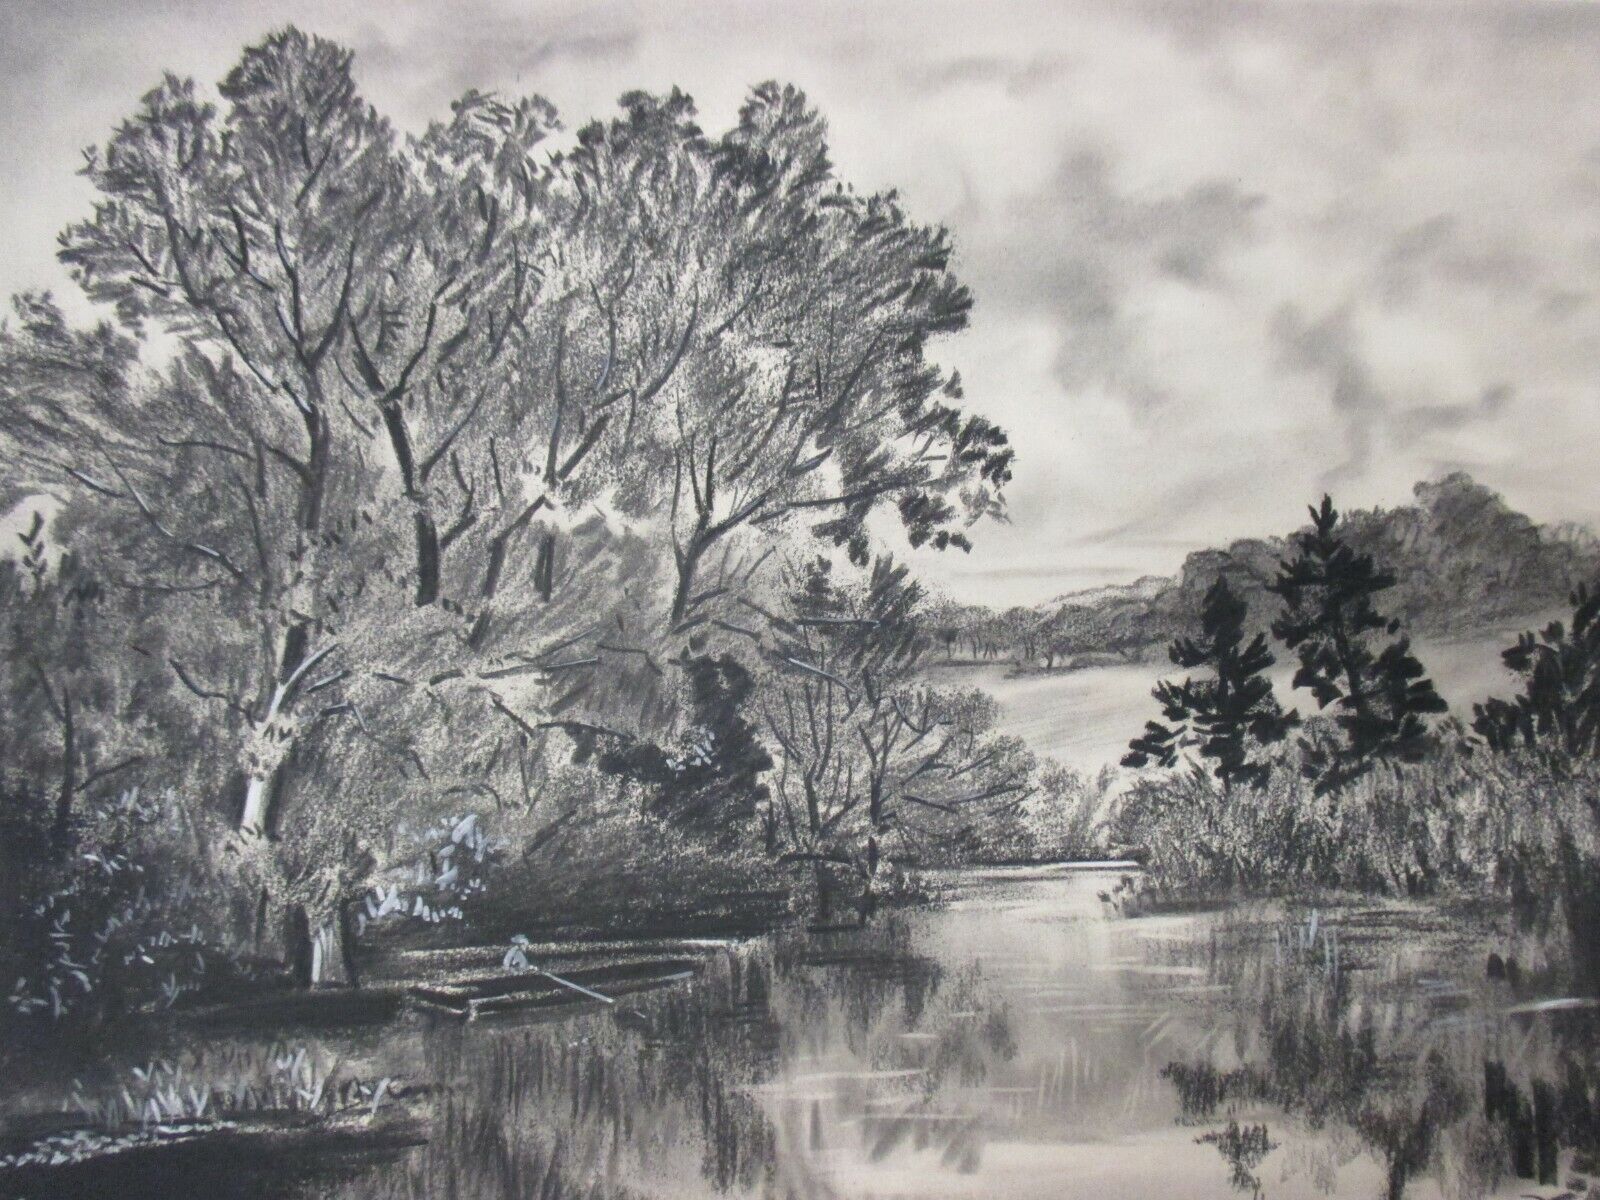 A beautiful painting of a lost wilderness with clear and realistic river